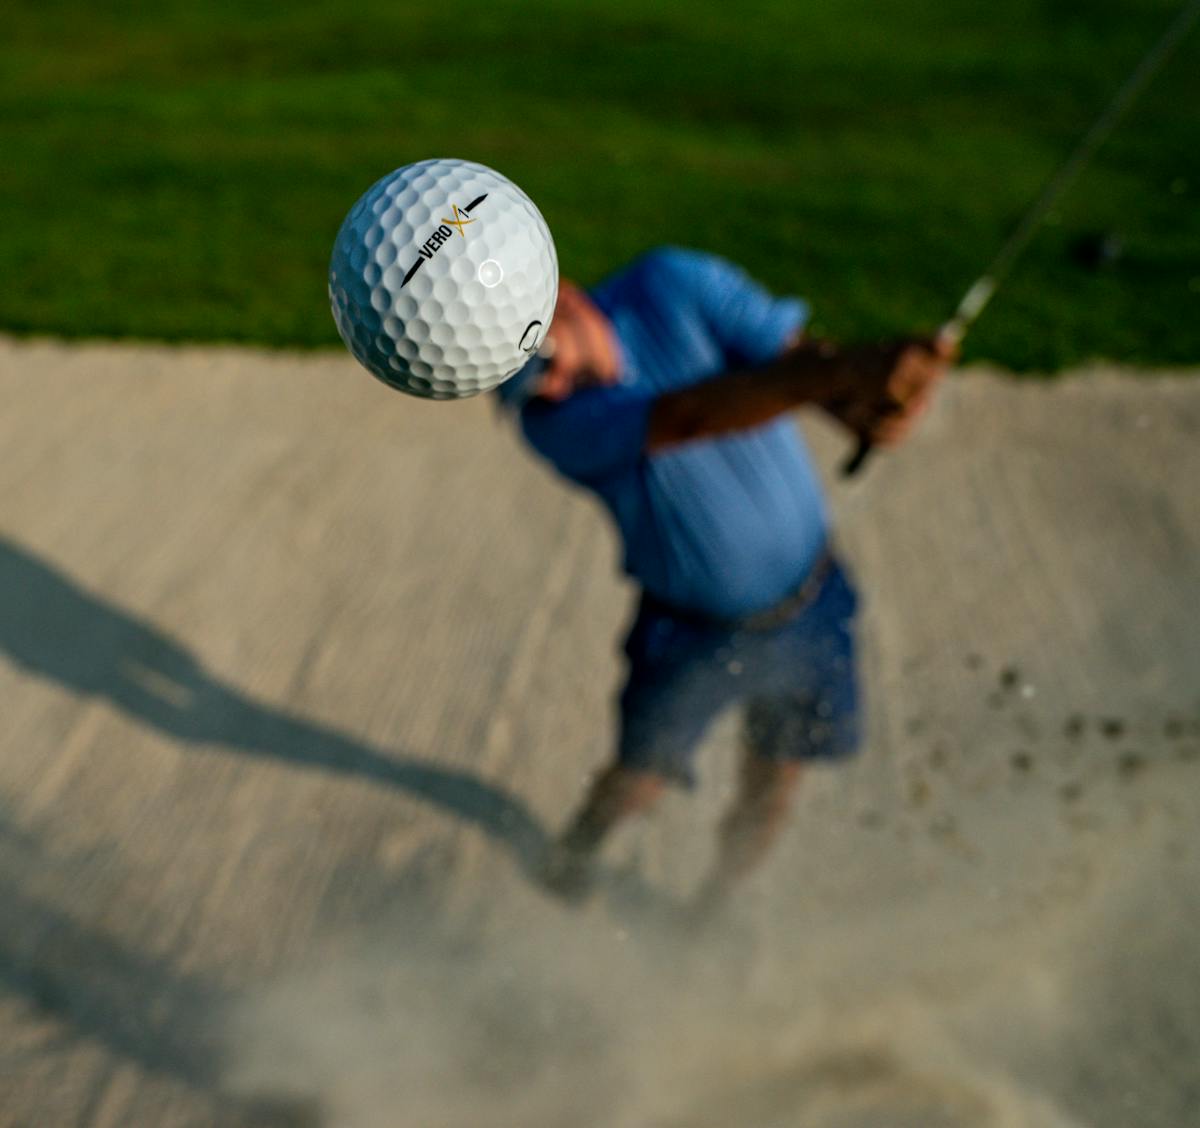 Golf imagery